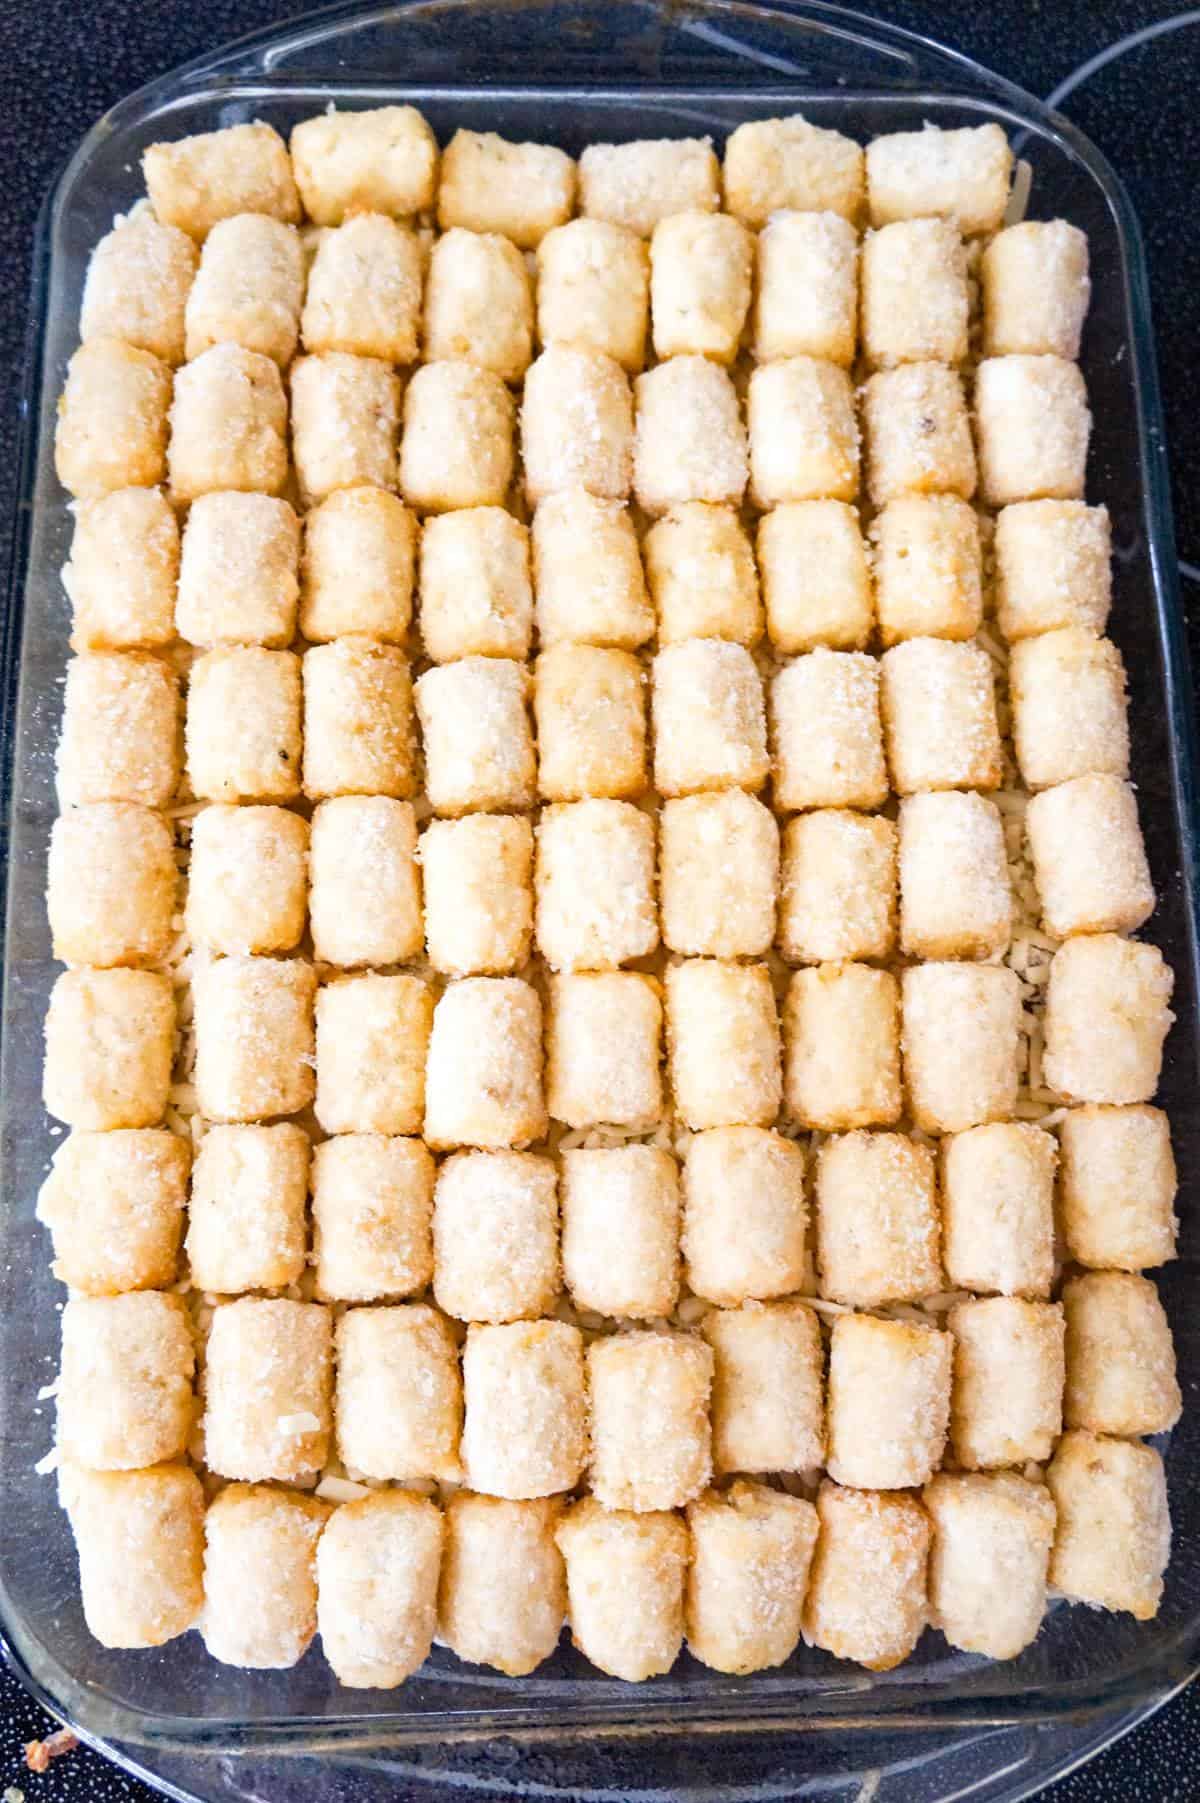 frozen tater tots on top of Swedish meatball casserole before baking